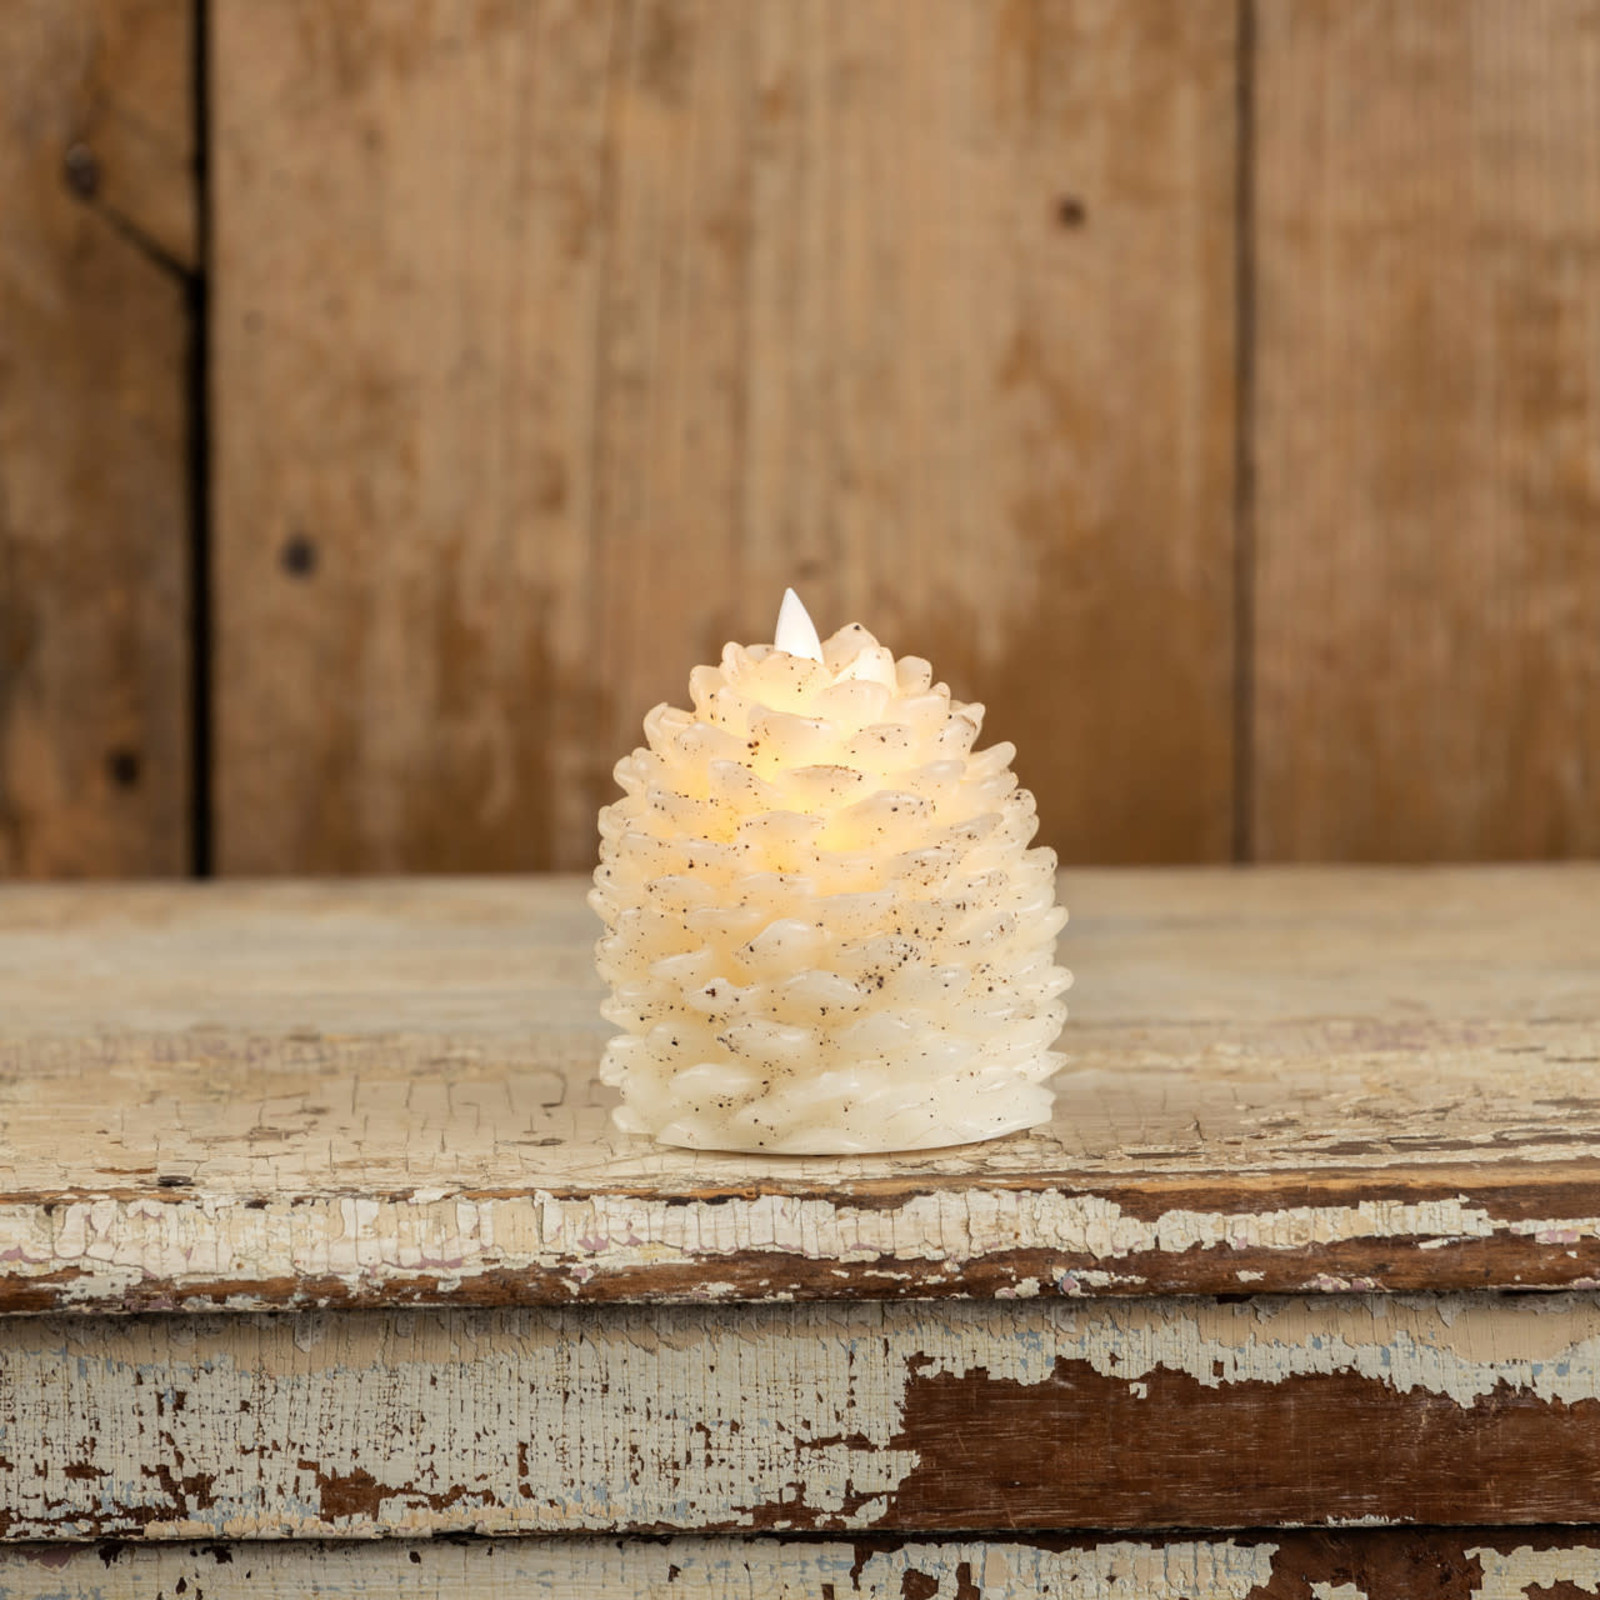 Ragon House 4.25 MOVING FLAME PINECONE CANDLE   NY213025 loading=